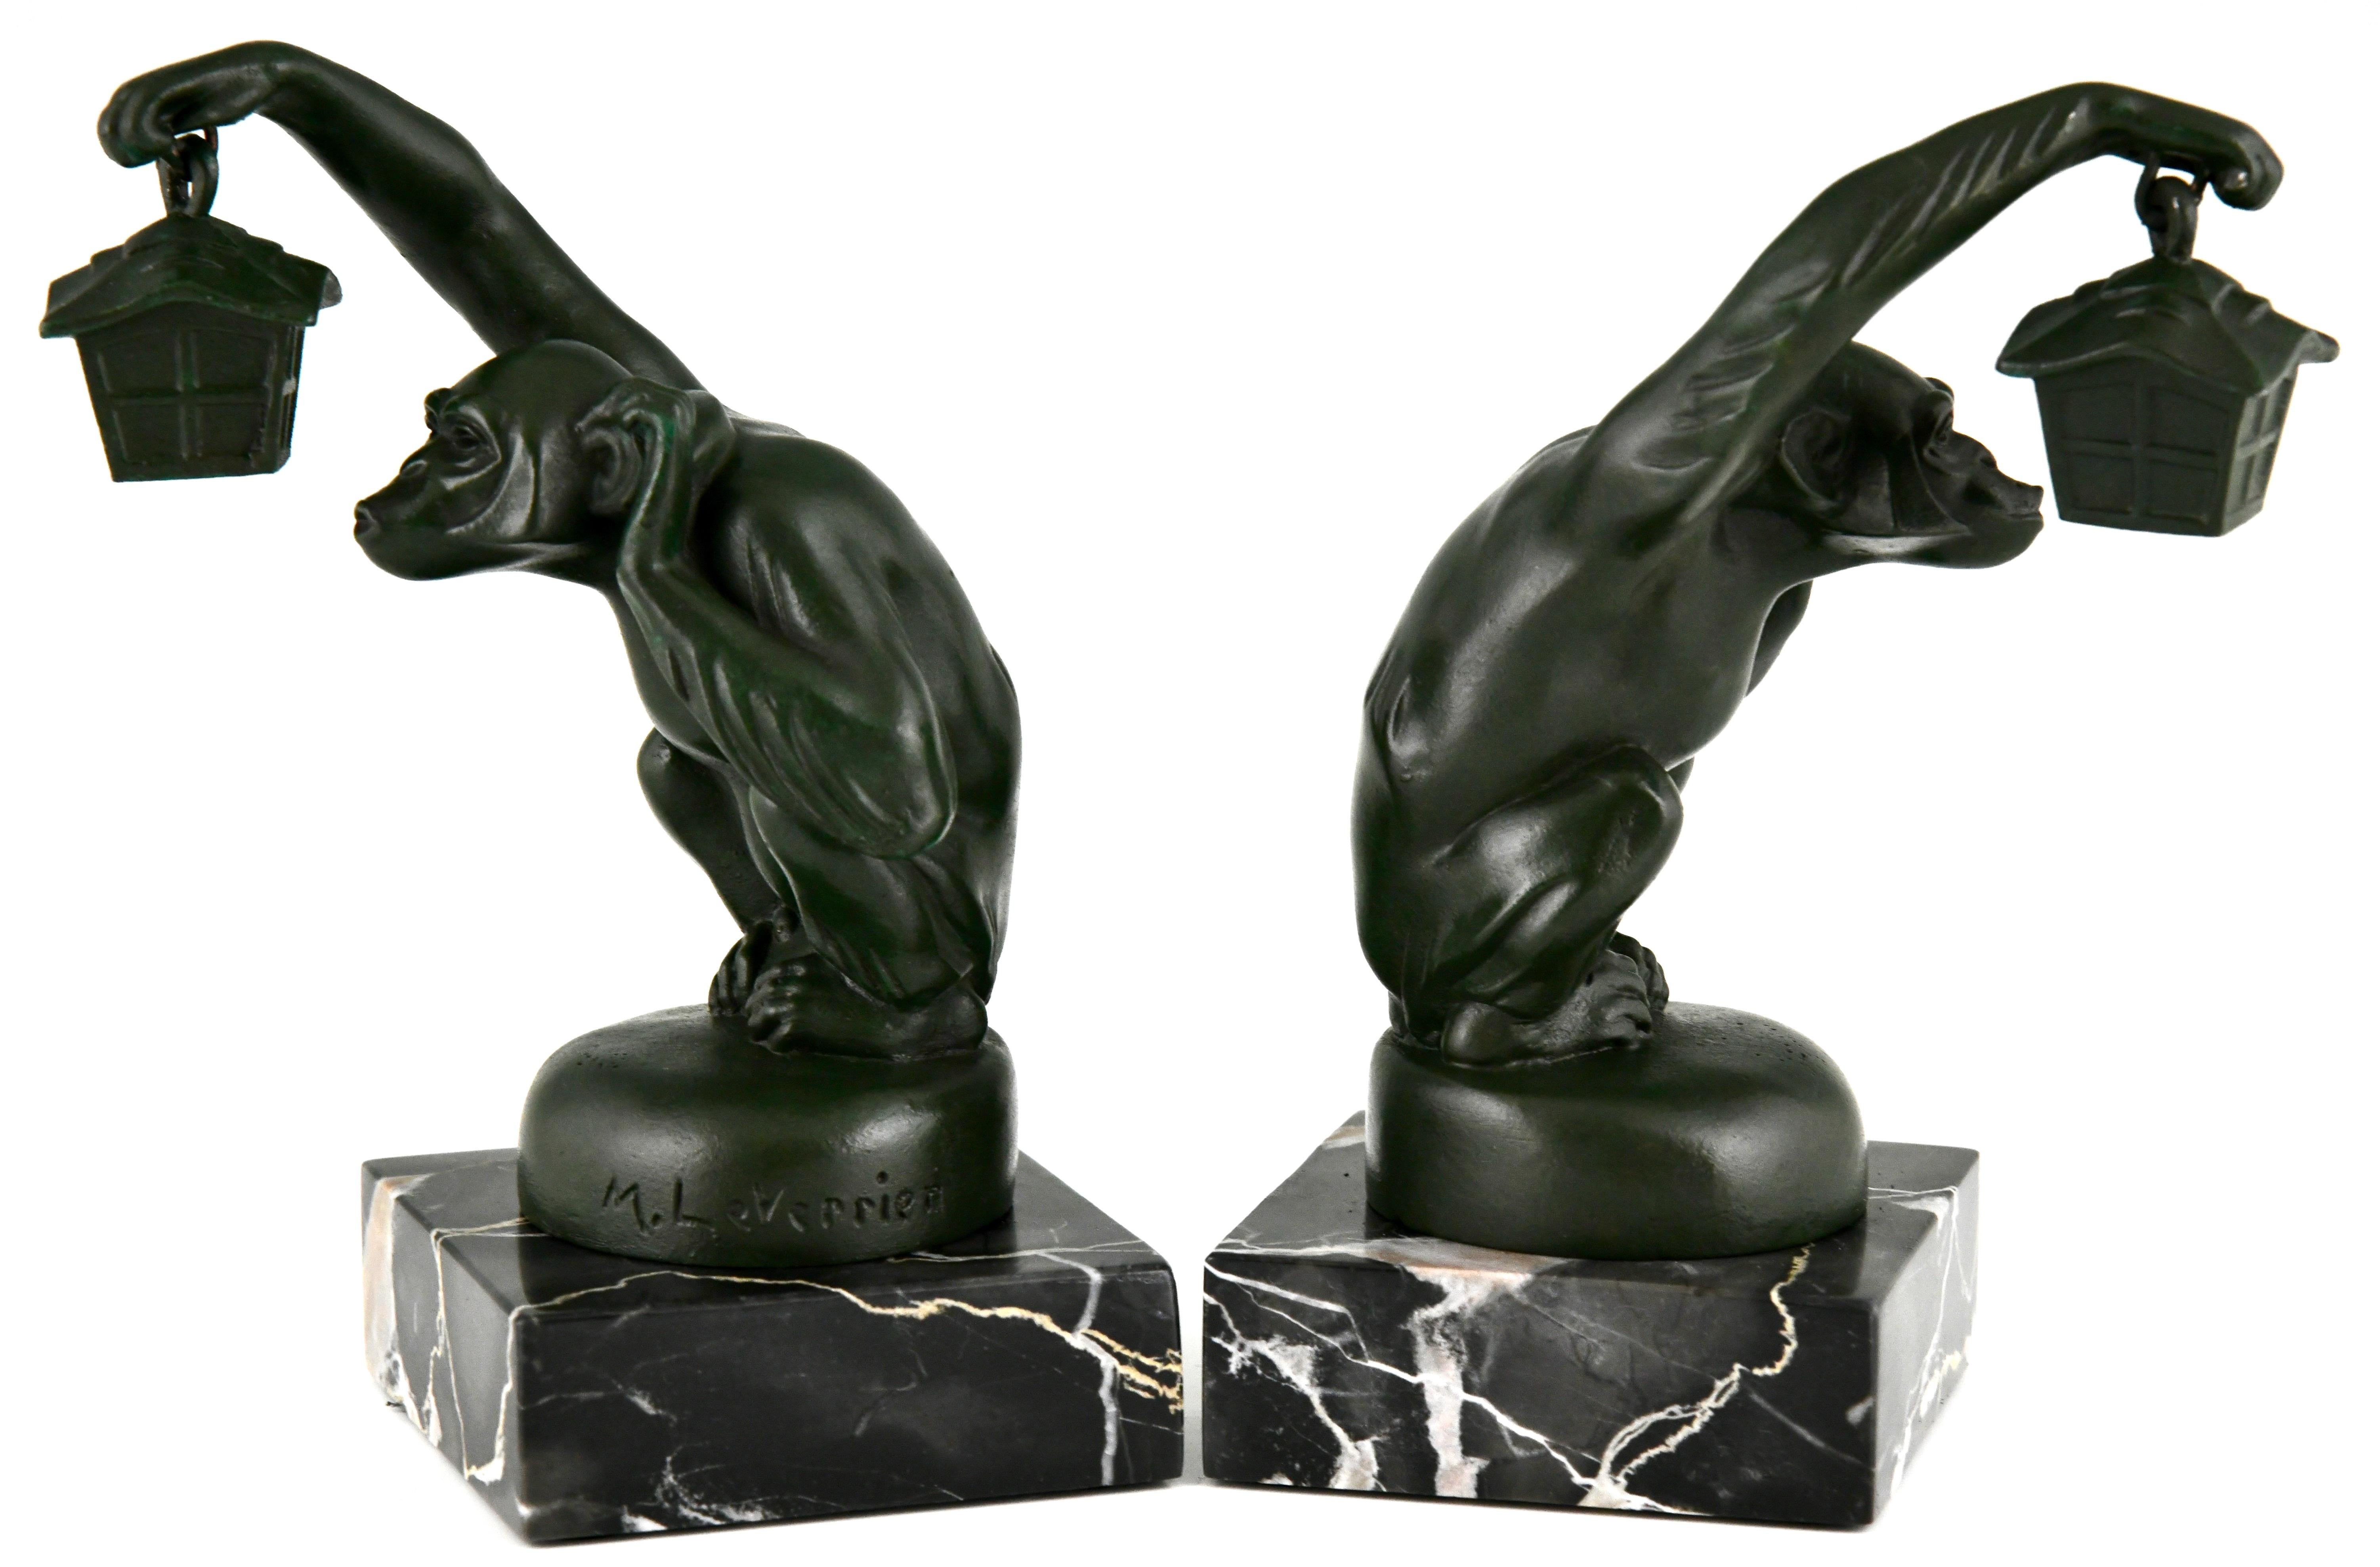 Art Deco bookends monkey with lantern by Max Le Verrier. 
Green patinated metal on a Portor marble base. France 1925. 
This model is called Boubou and illustrated in Mascottes automobiles, Michel Legrand, EPA éditions.